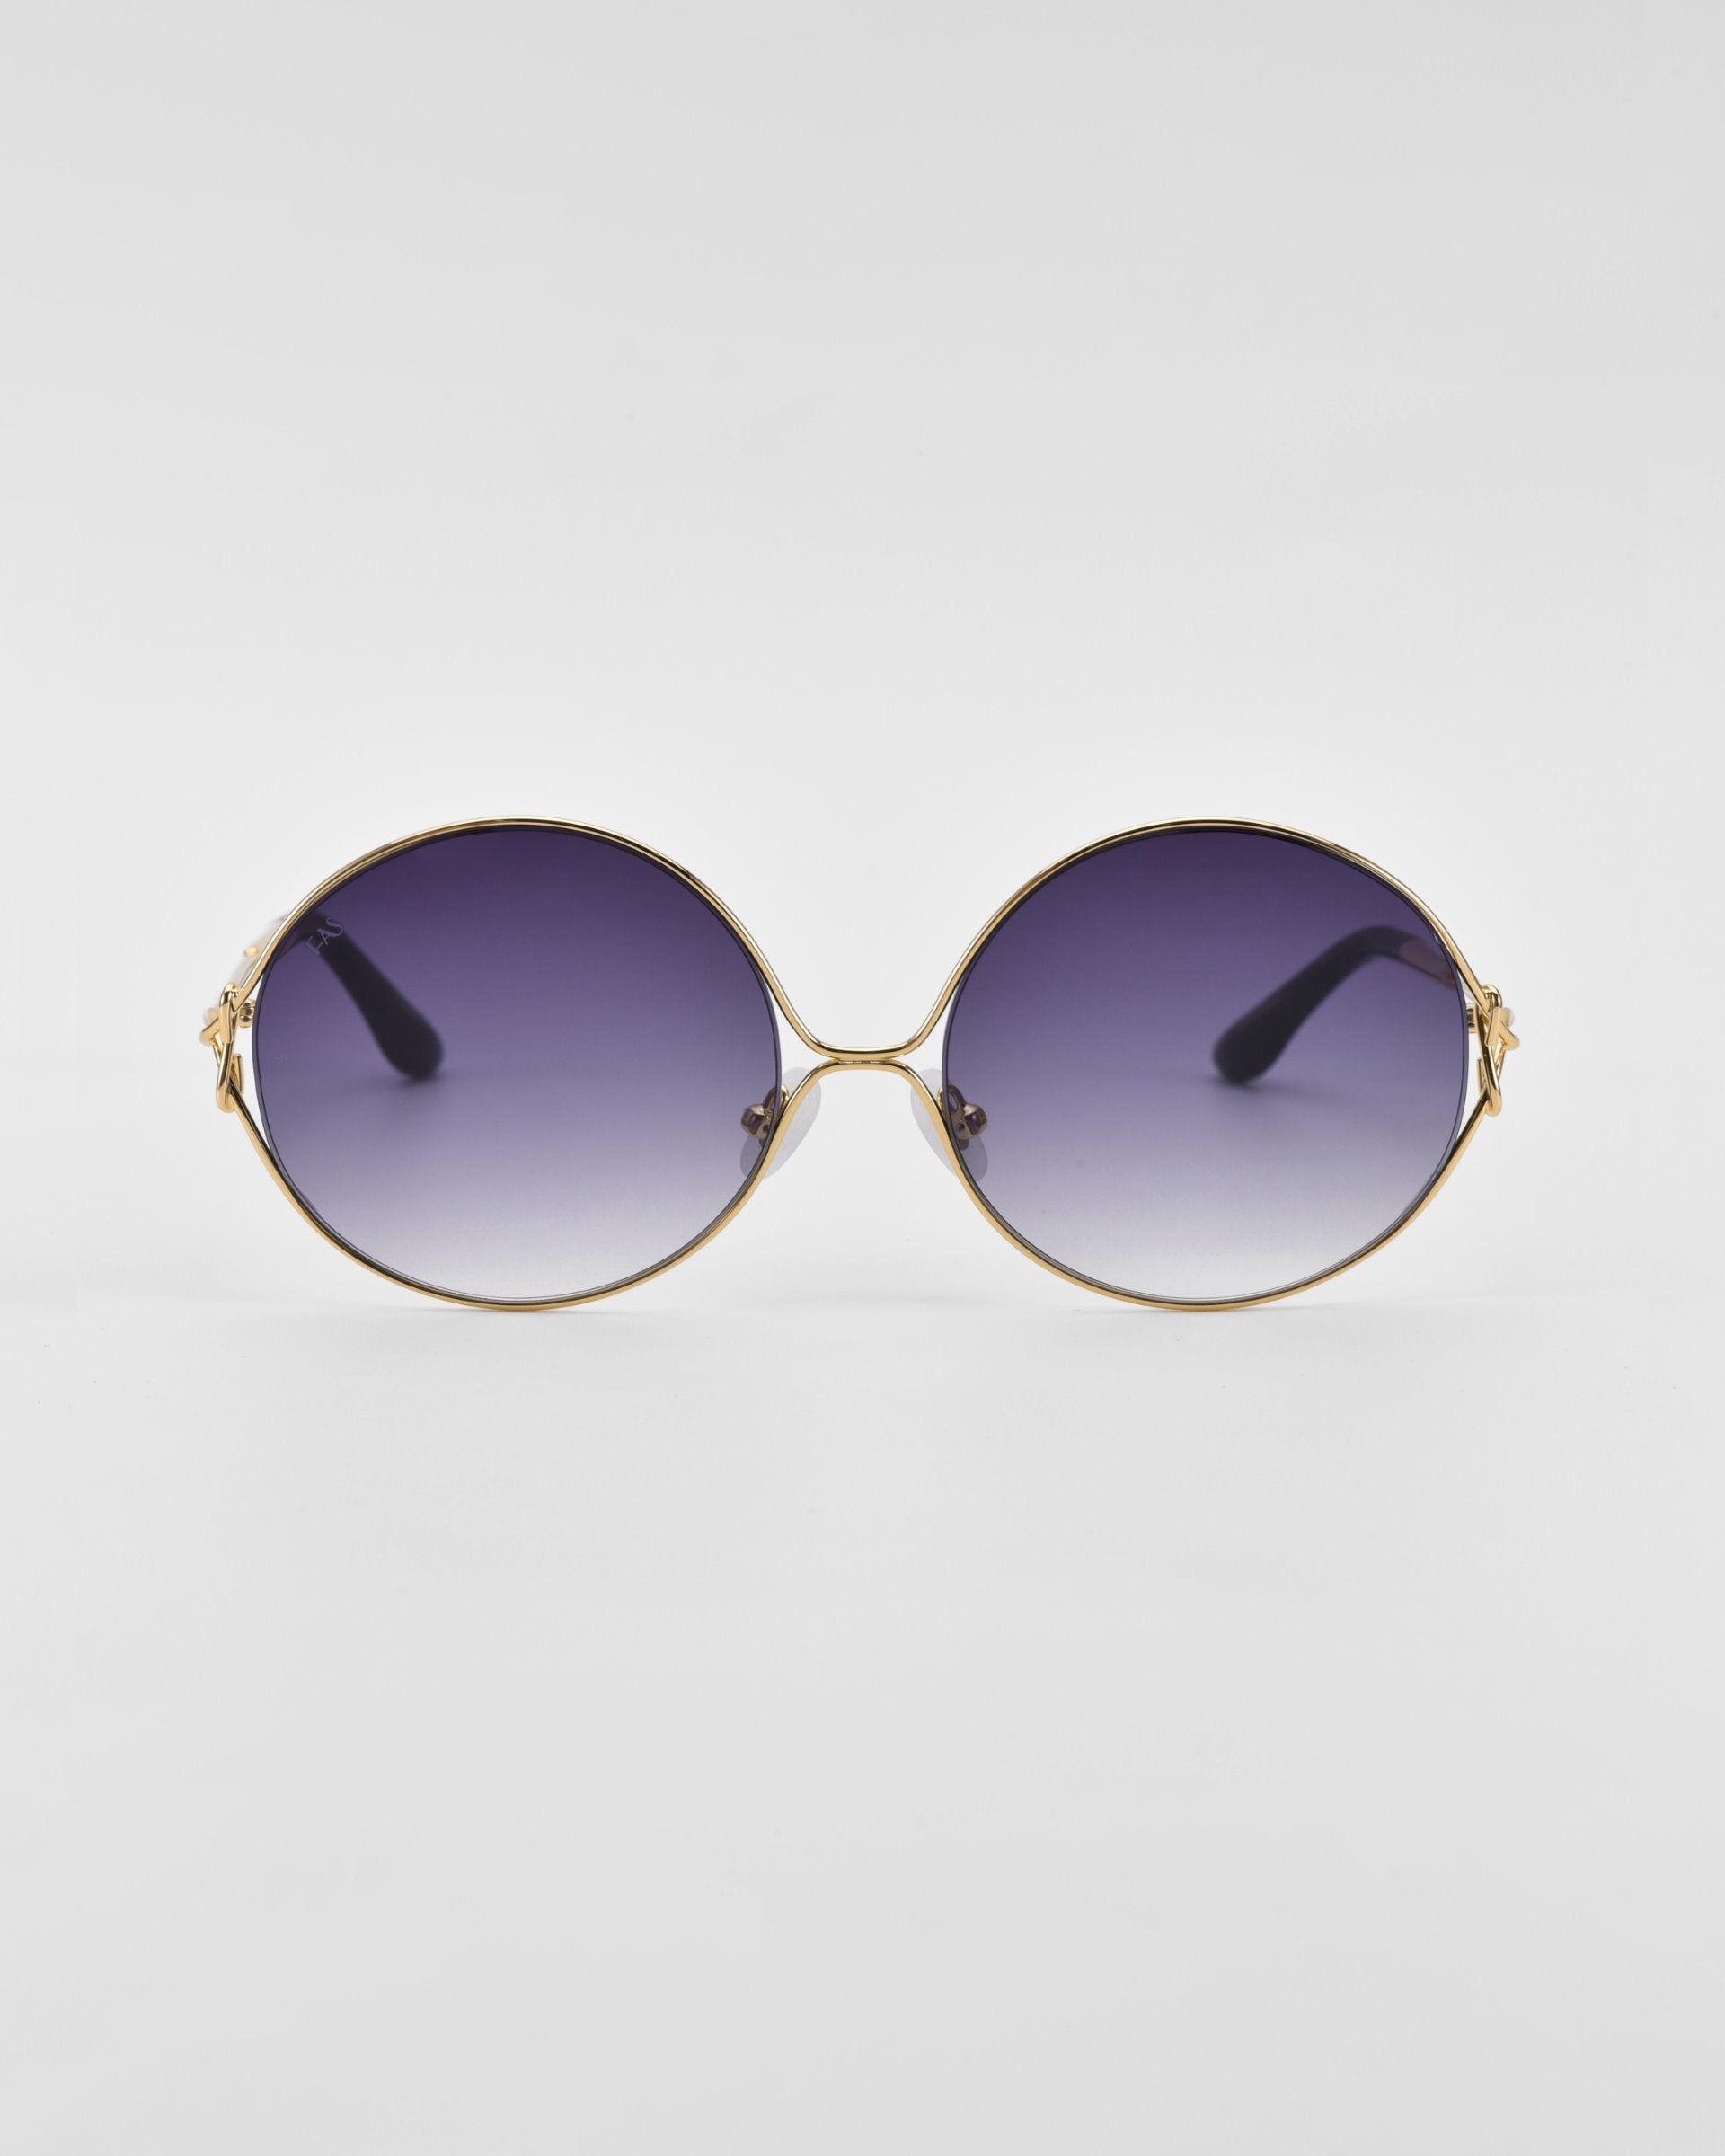 A pair of retro-inspired Aura sunglasses by For Art's Sake® with oversized round gold frames and purple gradient lenses. The temples are adorned with small decorative elements near the hinges, set against a plain white background.